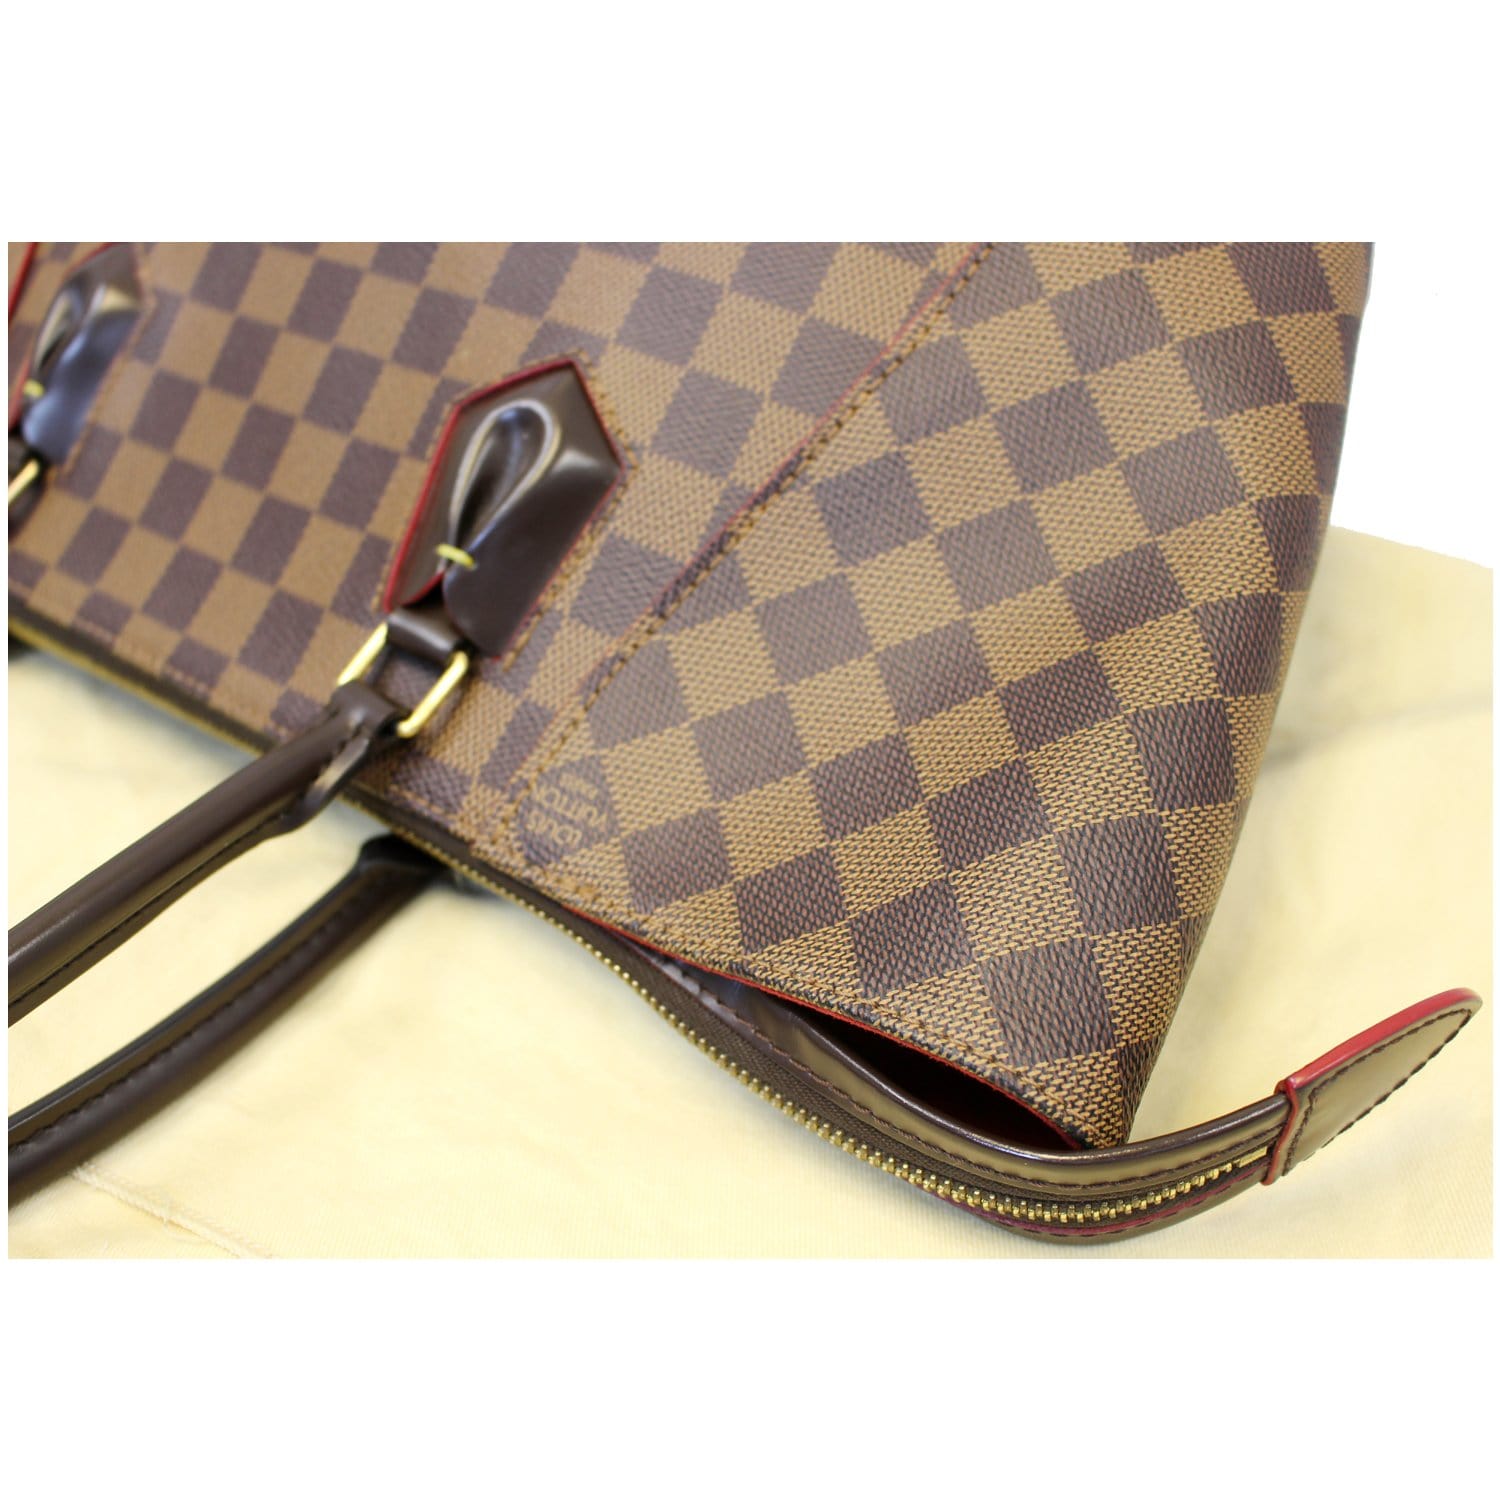 Buy Louis Vuitton LOUIS VUITTON CAISSA TOTE MM at Redfynd